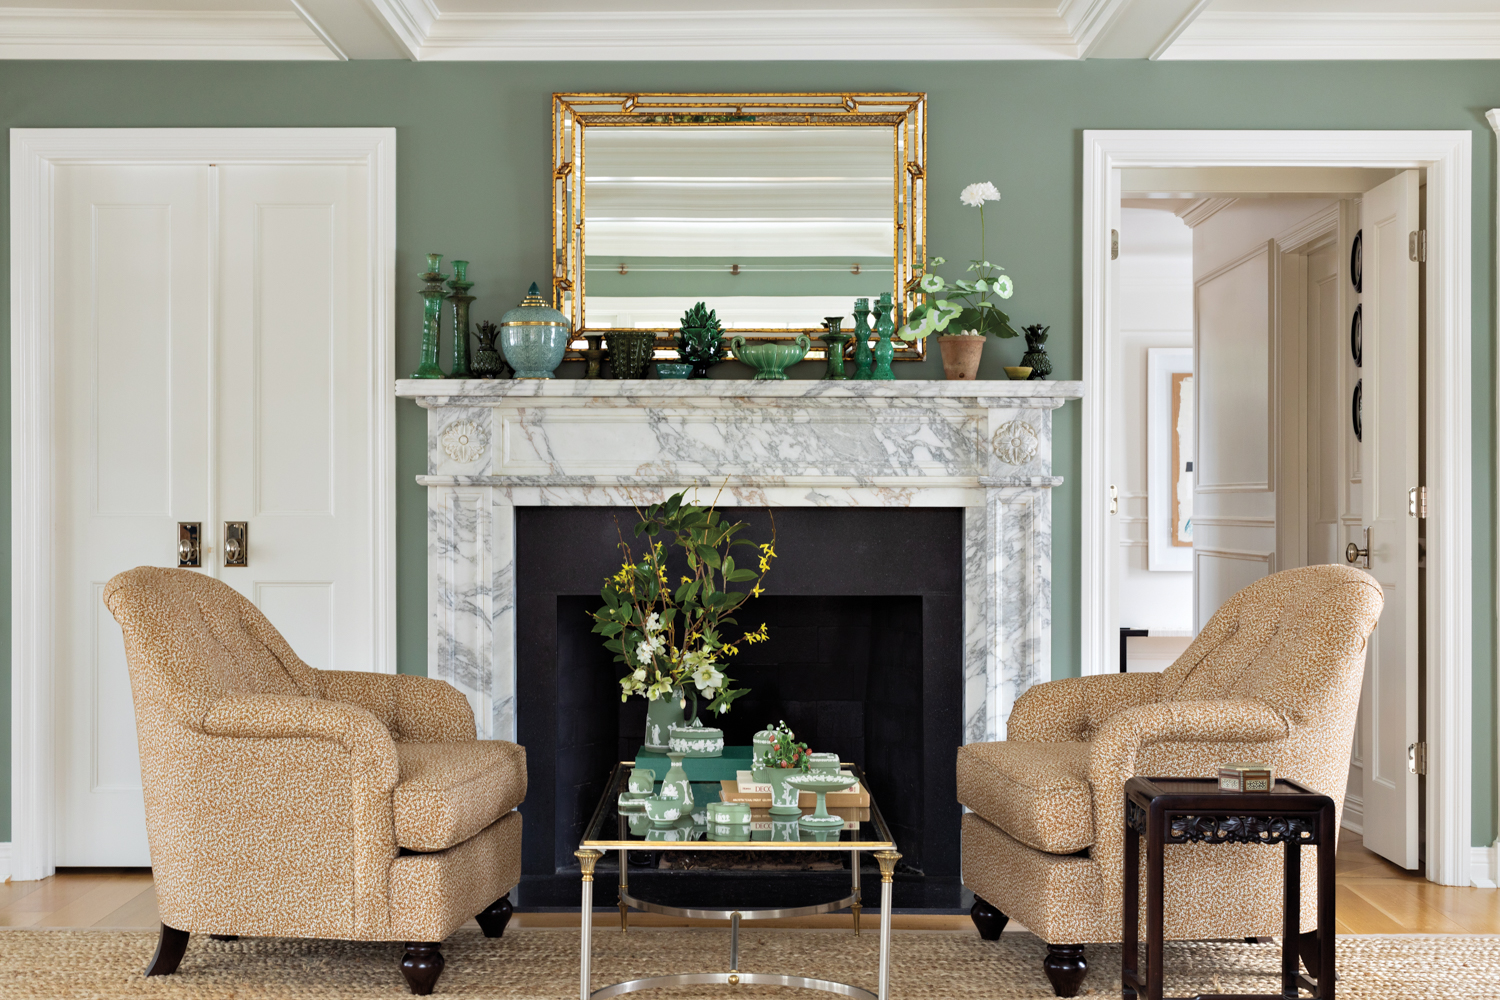 Two armchairs facing each other with a glass-and-metal coffee table between, in front of a marble fireplace and green wall.